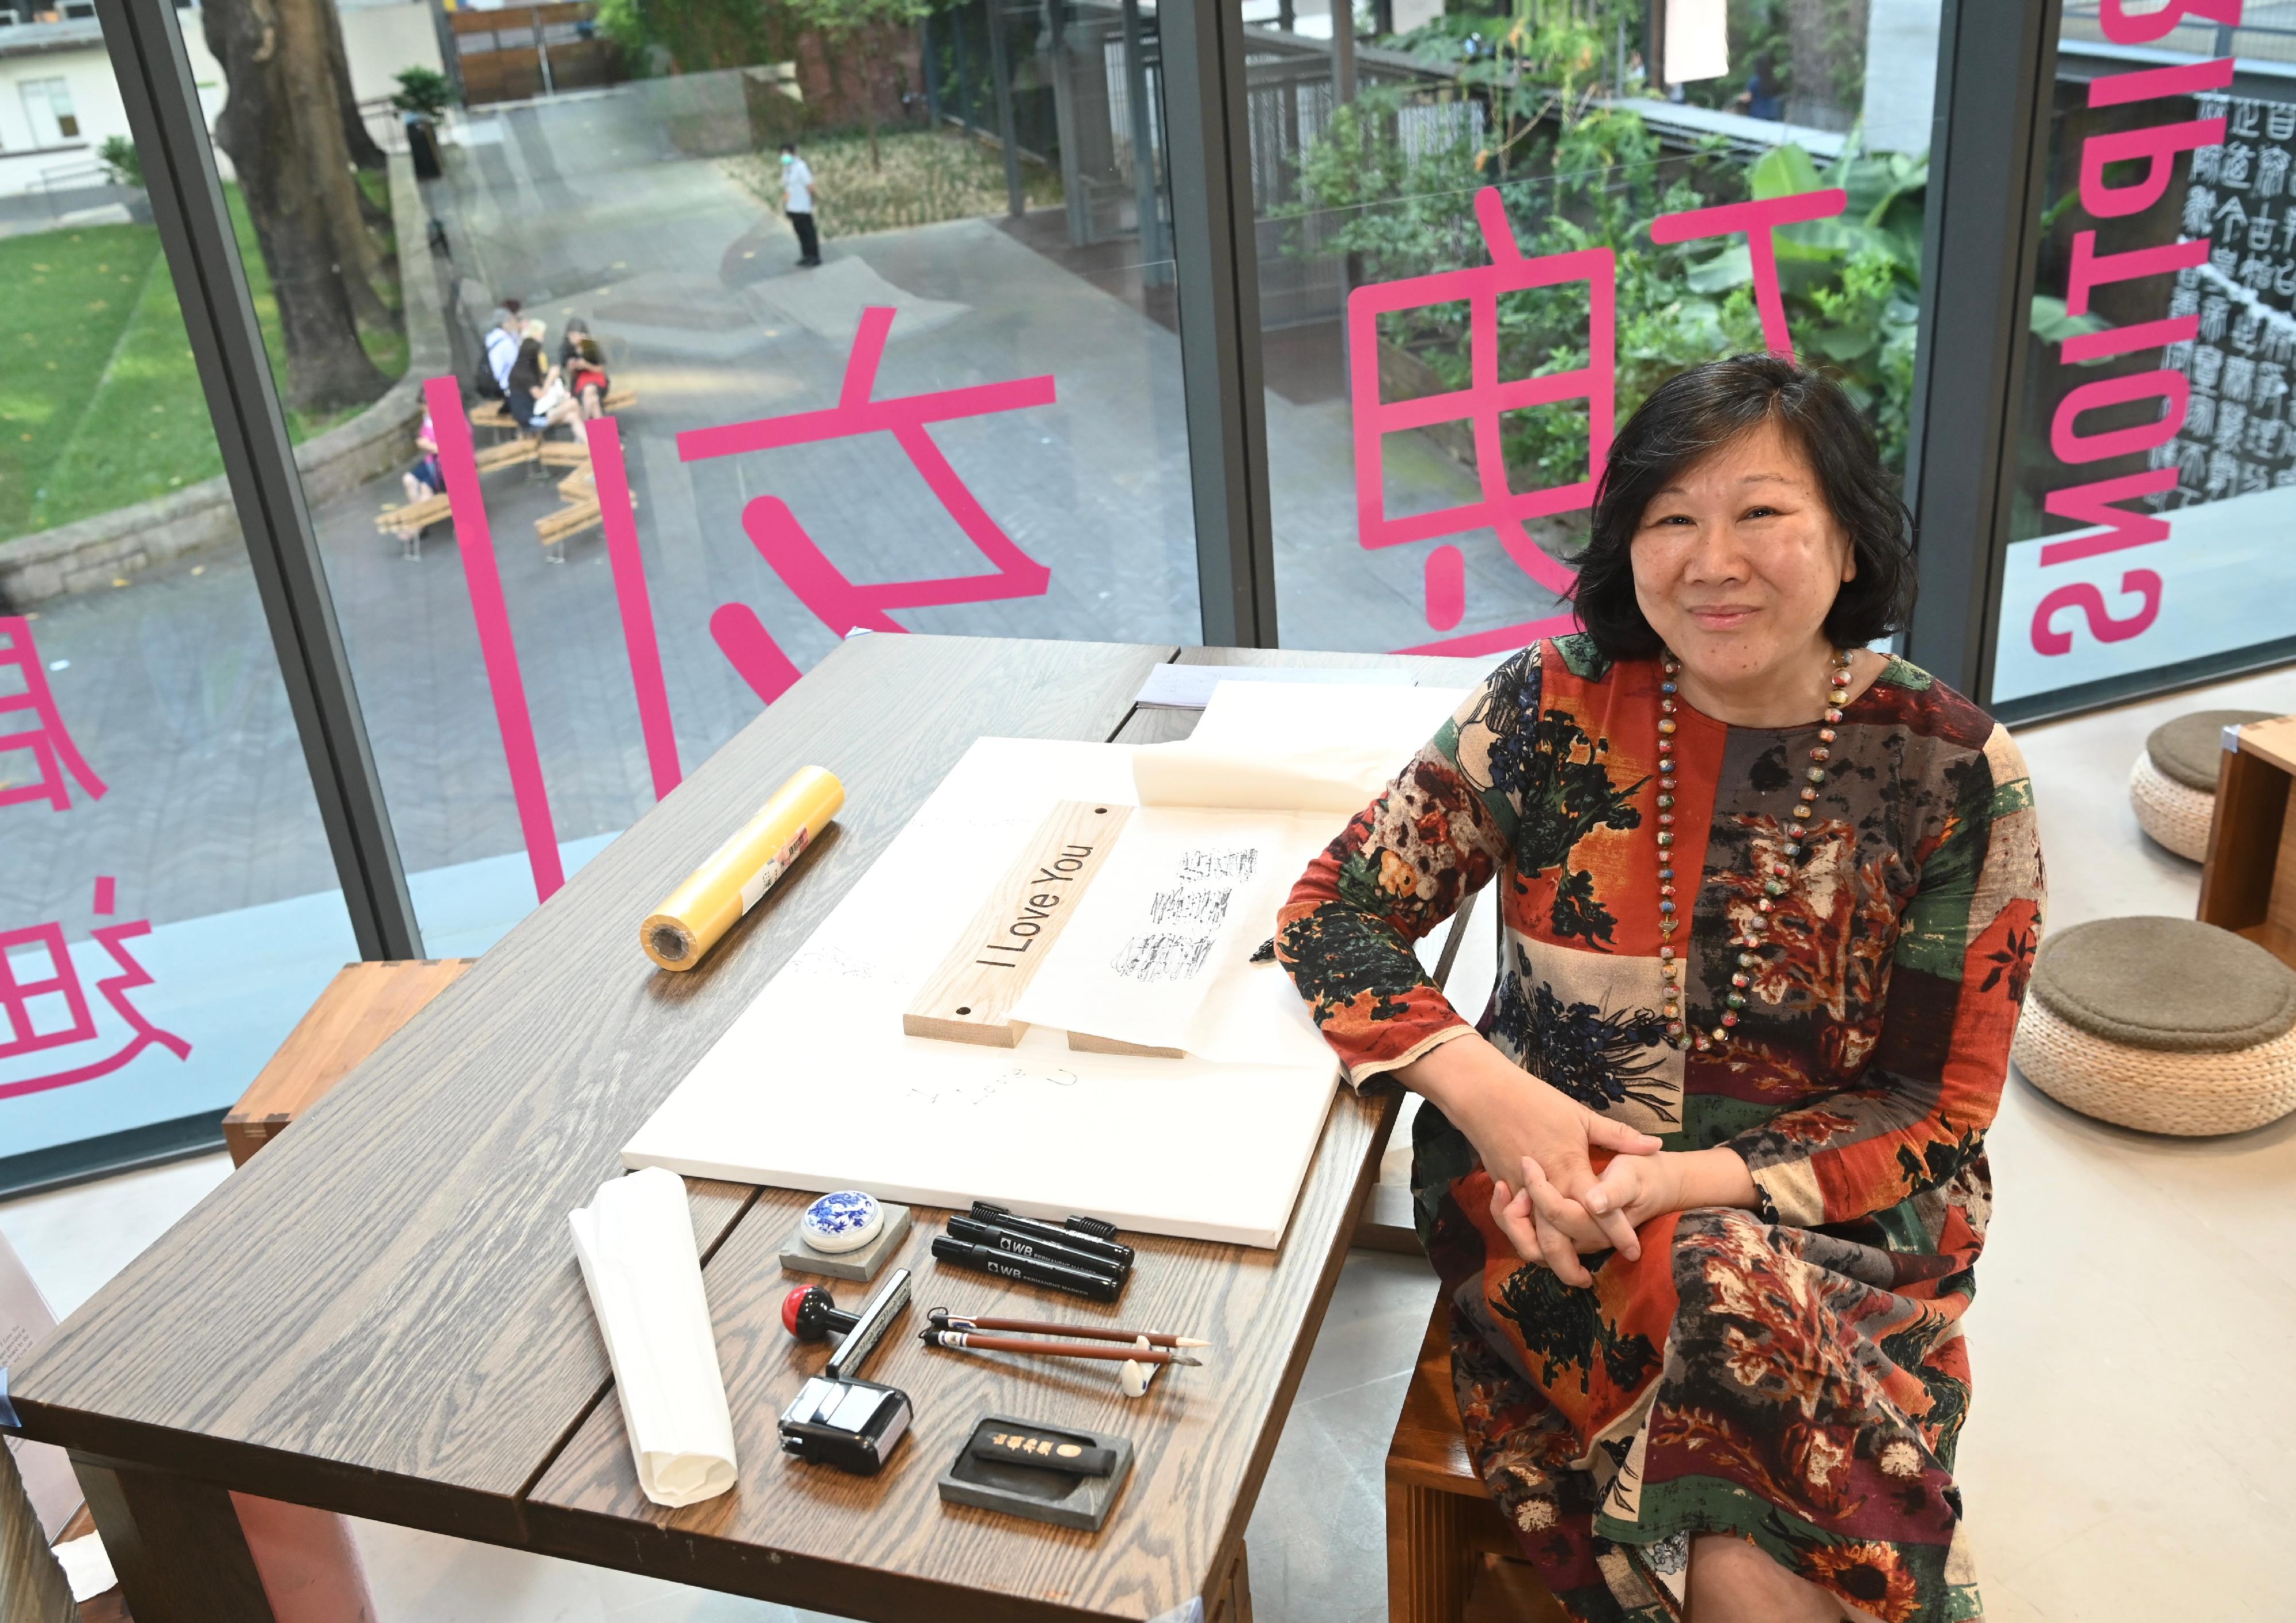 The "Archaic Curator Series: Kings' Inscriptions‧Contemporary Interpretations" exhibition will be open to the public from tomorrow (September 28) at Oi! Glassie. Photo shows artist Leung Kwan Kiu and her community participation project, "I Love You".